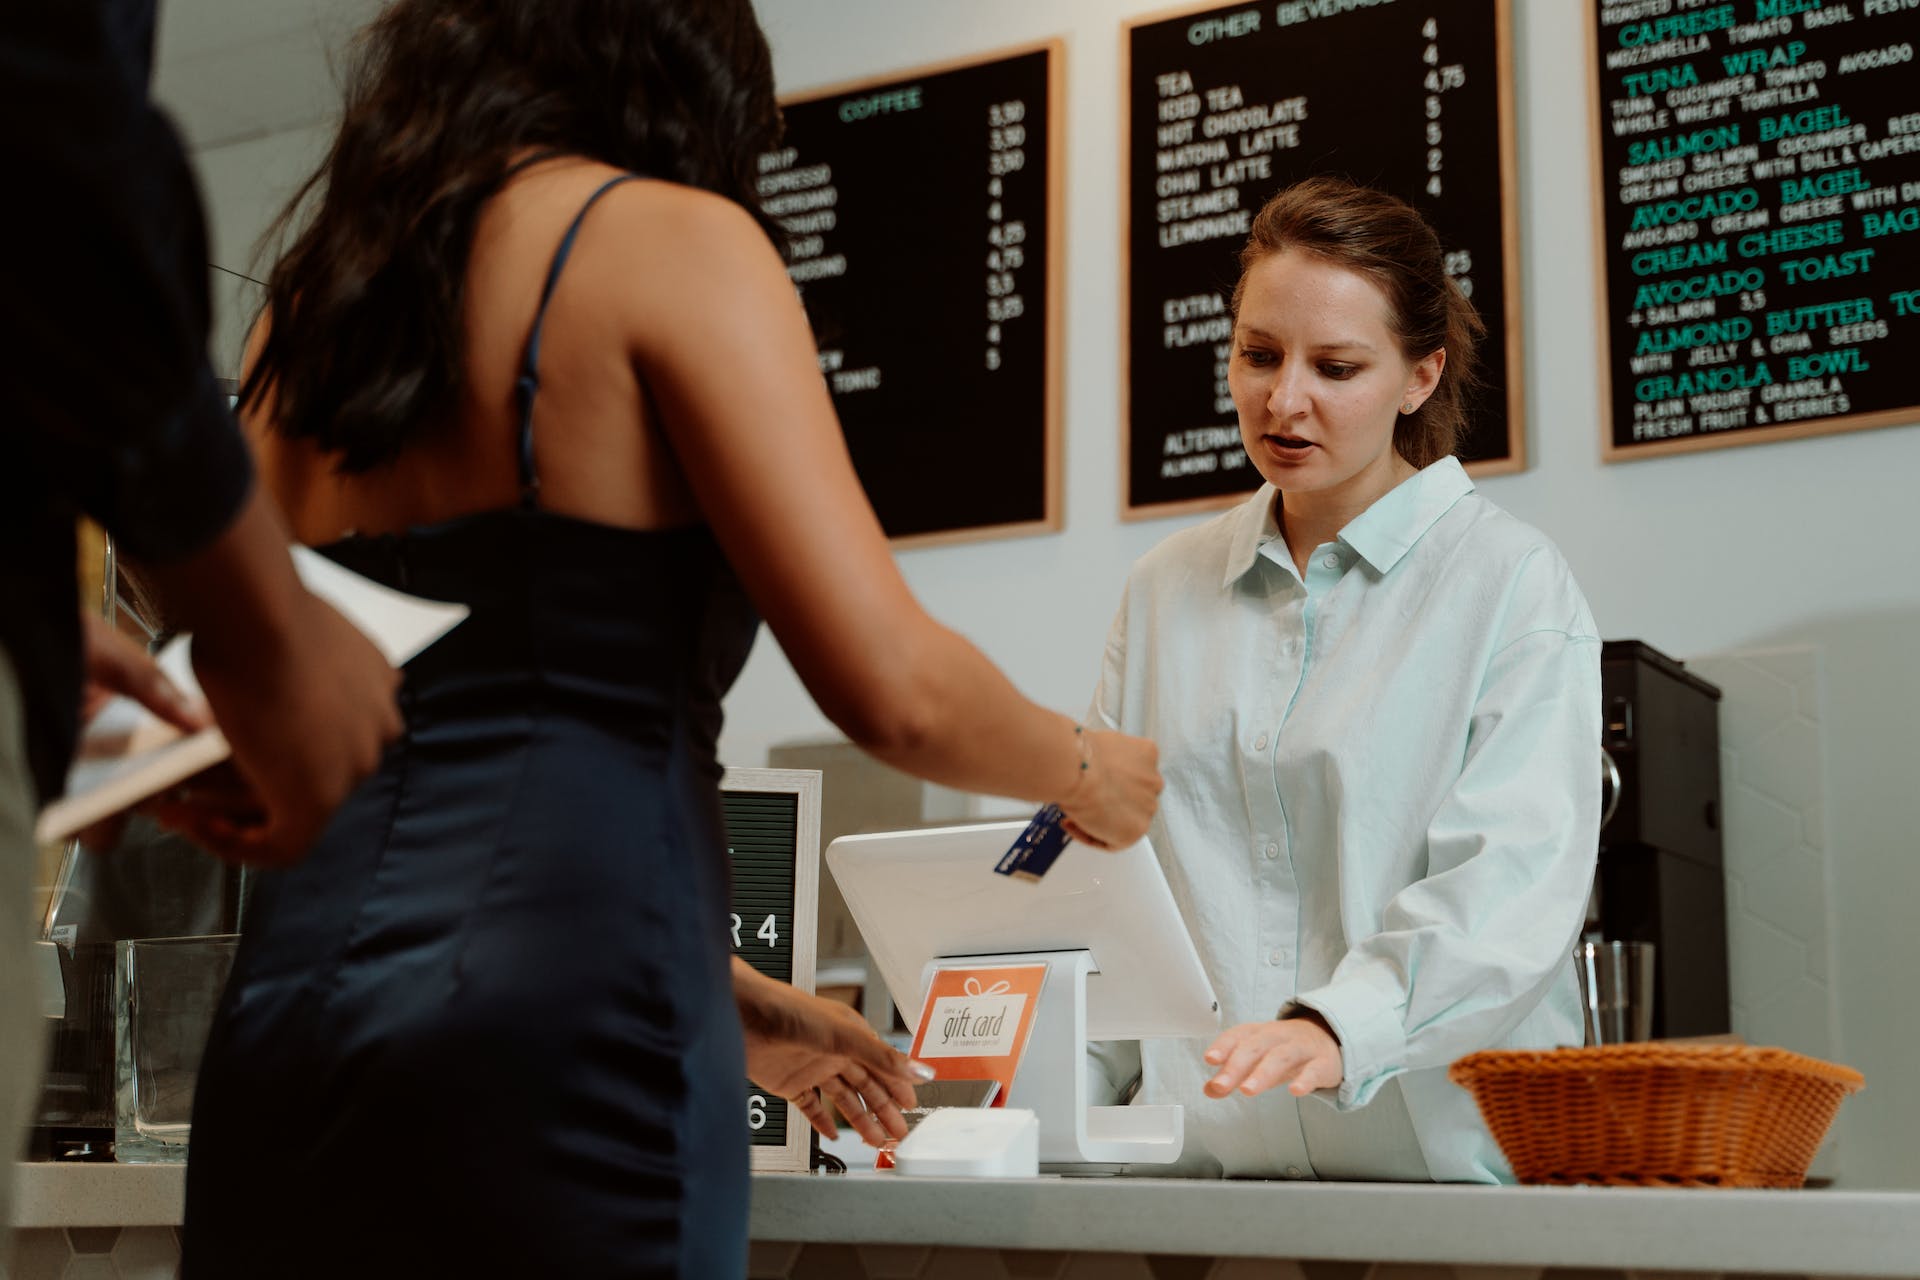 A cashier at a cafe interacting with customers | Source: Pexels